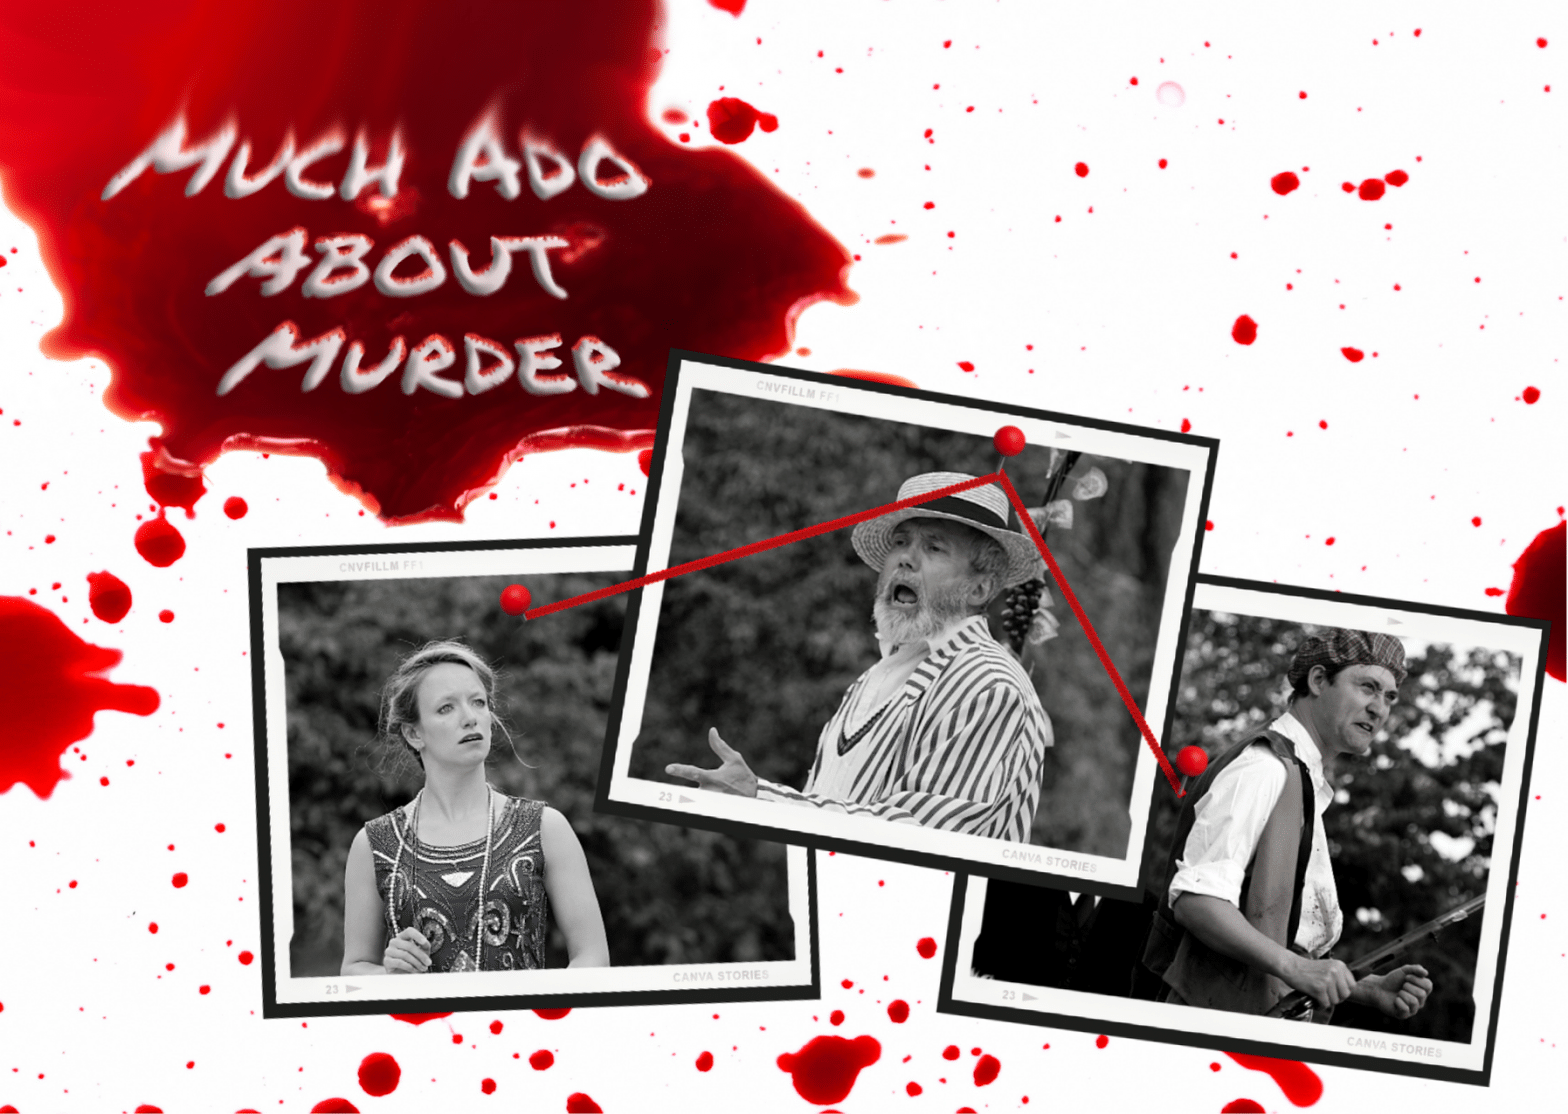 Much Ado About Murder outdoor theatre production